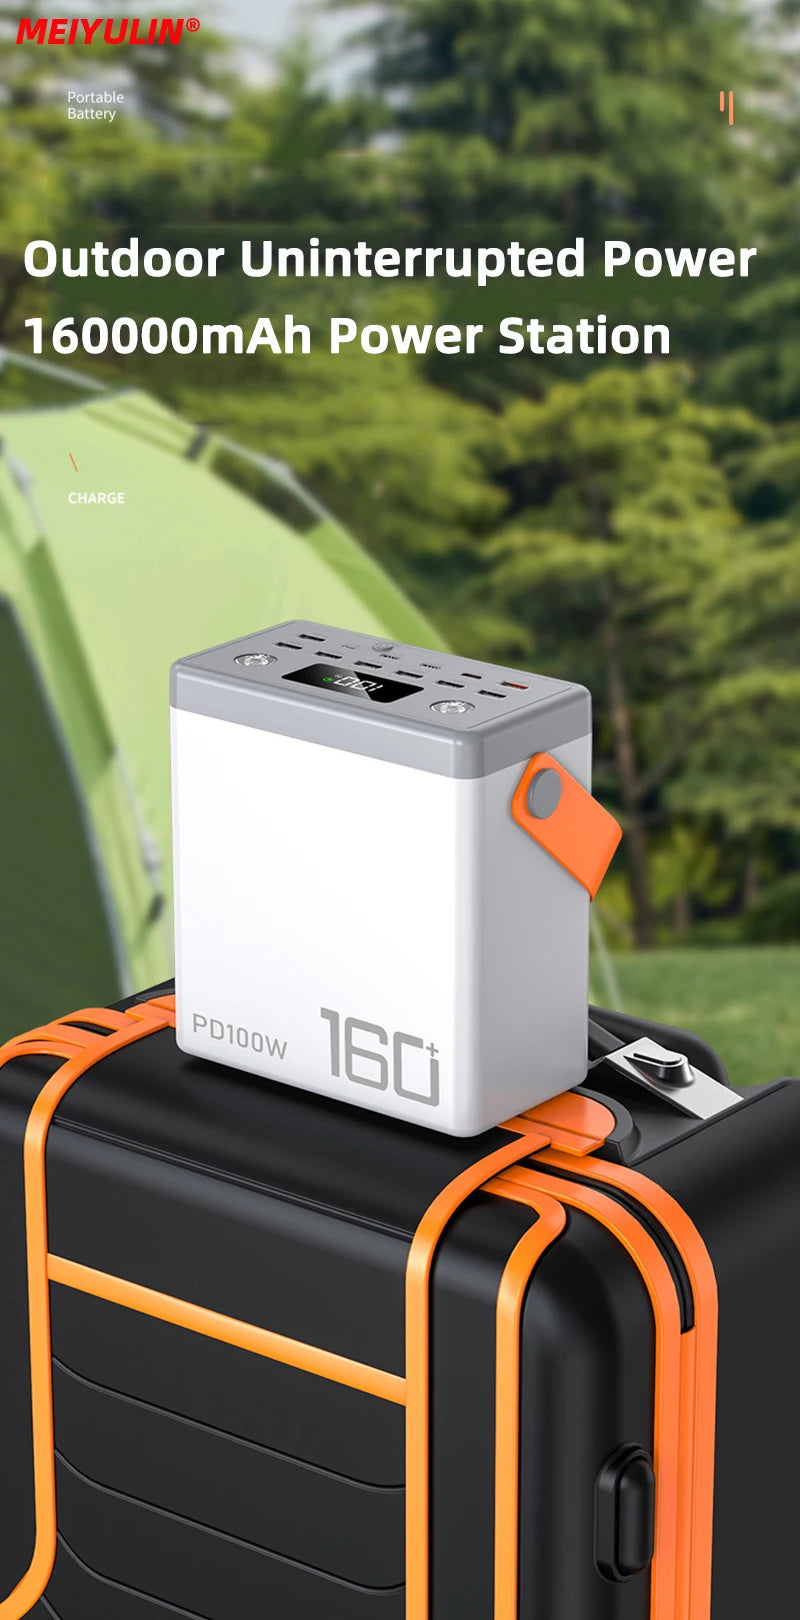 MEIYULIN Portable Power Bank 100W Battery 160000mAh Fast Charger - Inverted Powers